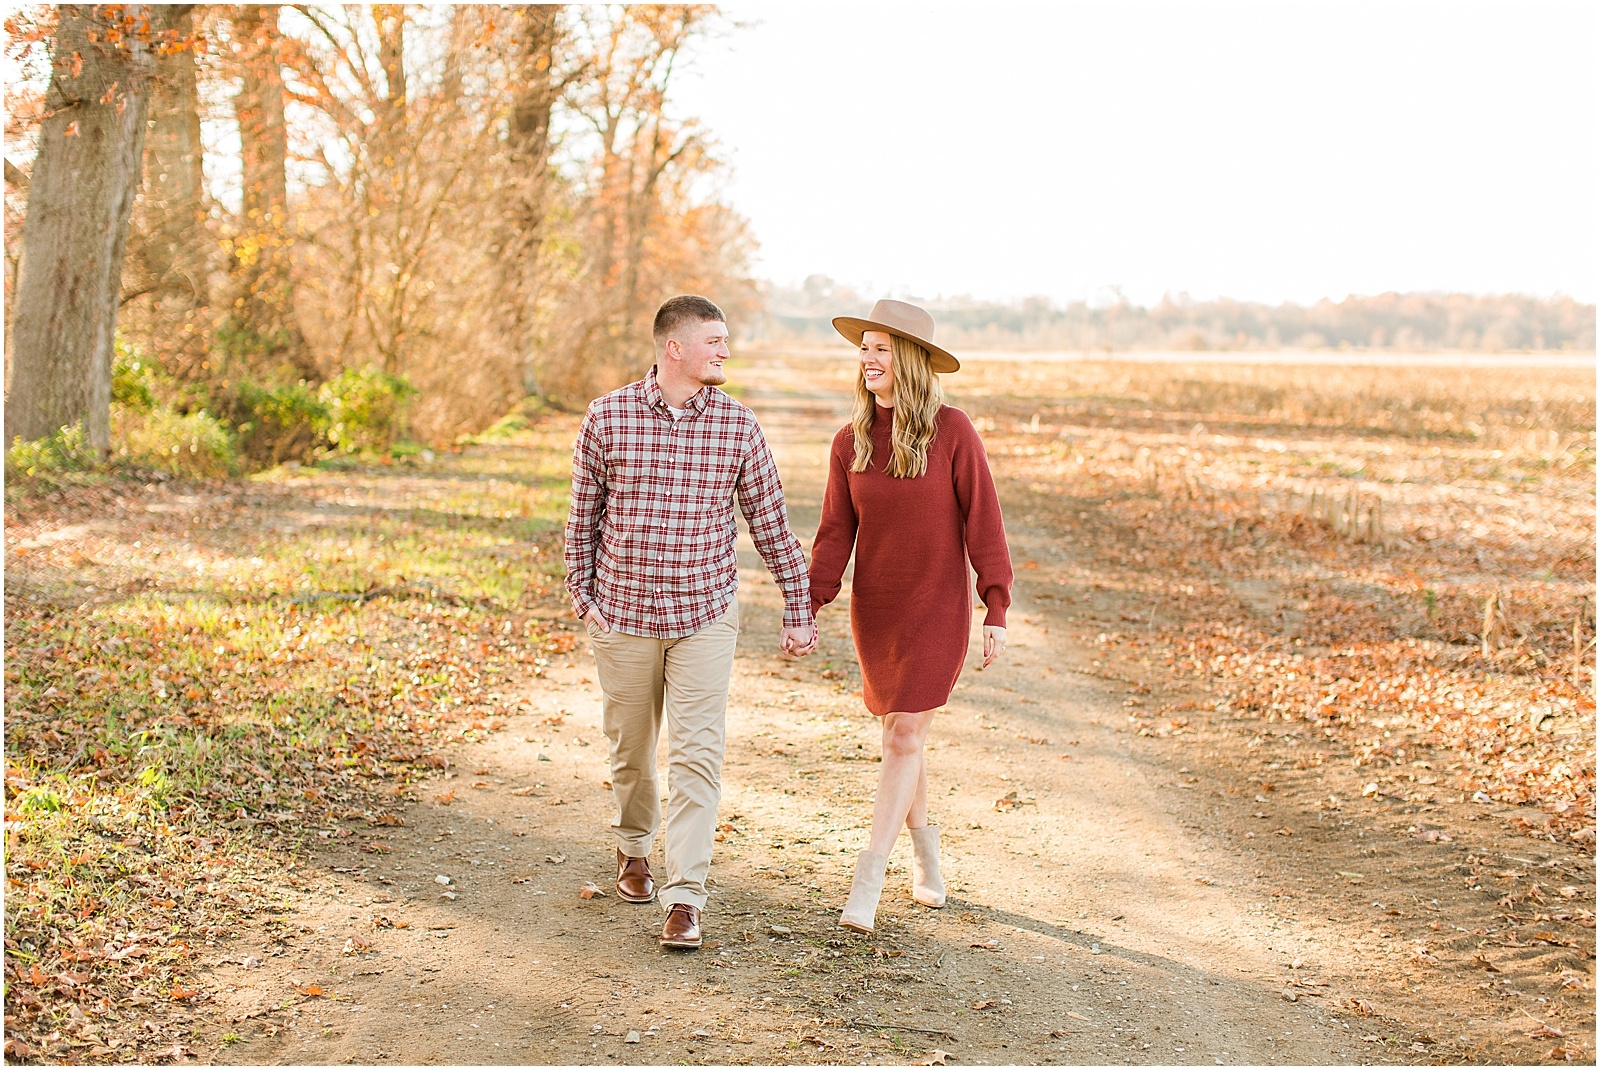 A Fall Southern Indiana Engagement Seesion | Cody and Hannah | Bret and Brandie Photography 004.jpg